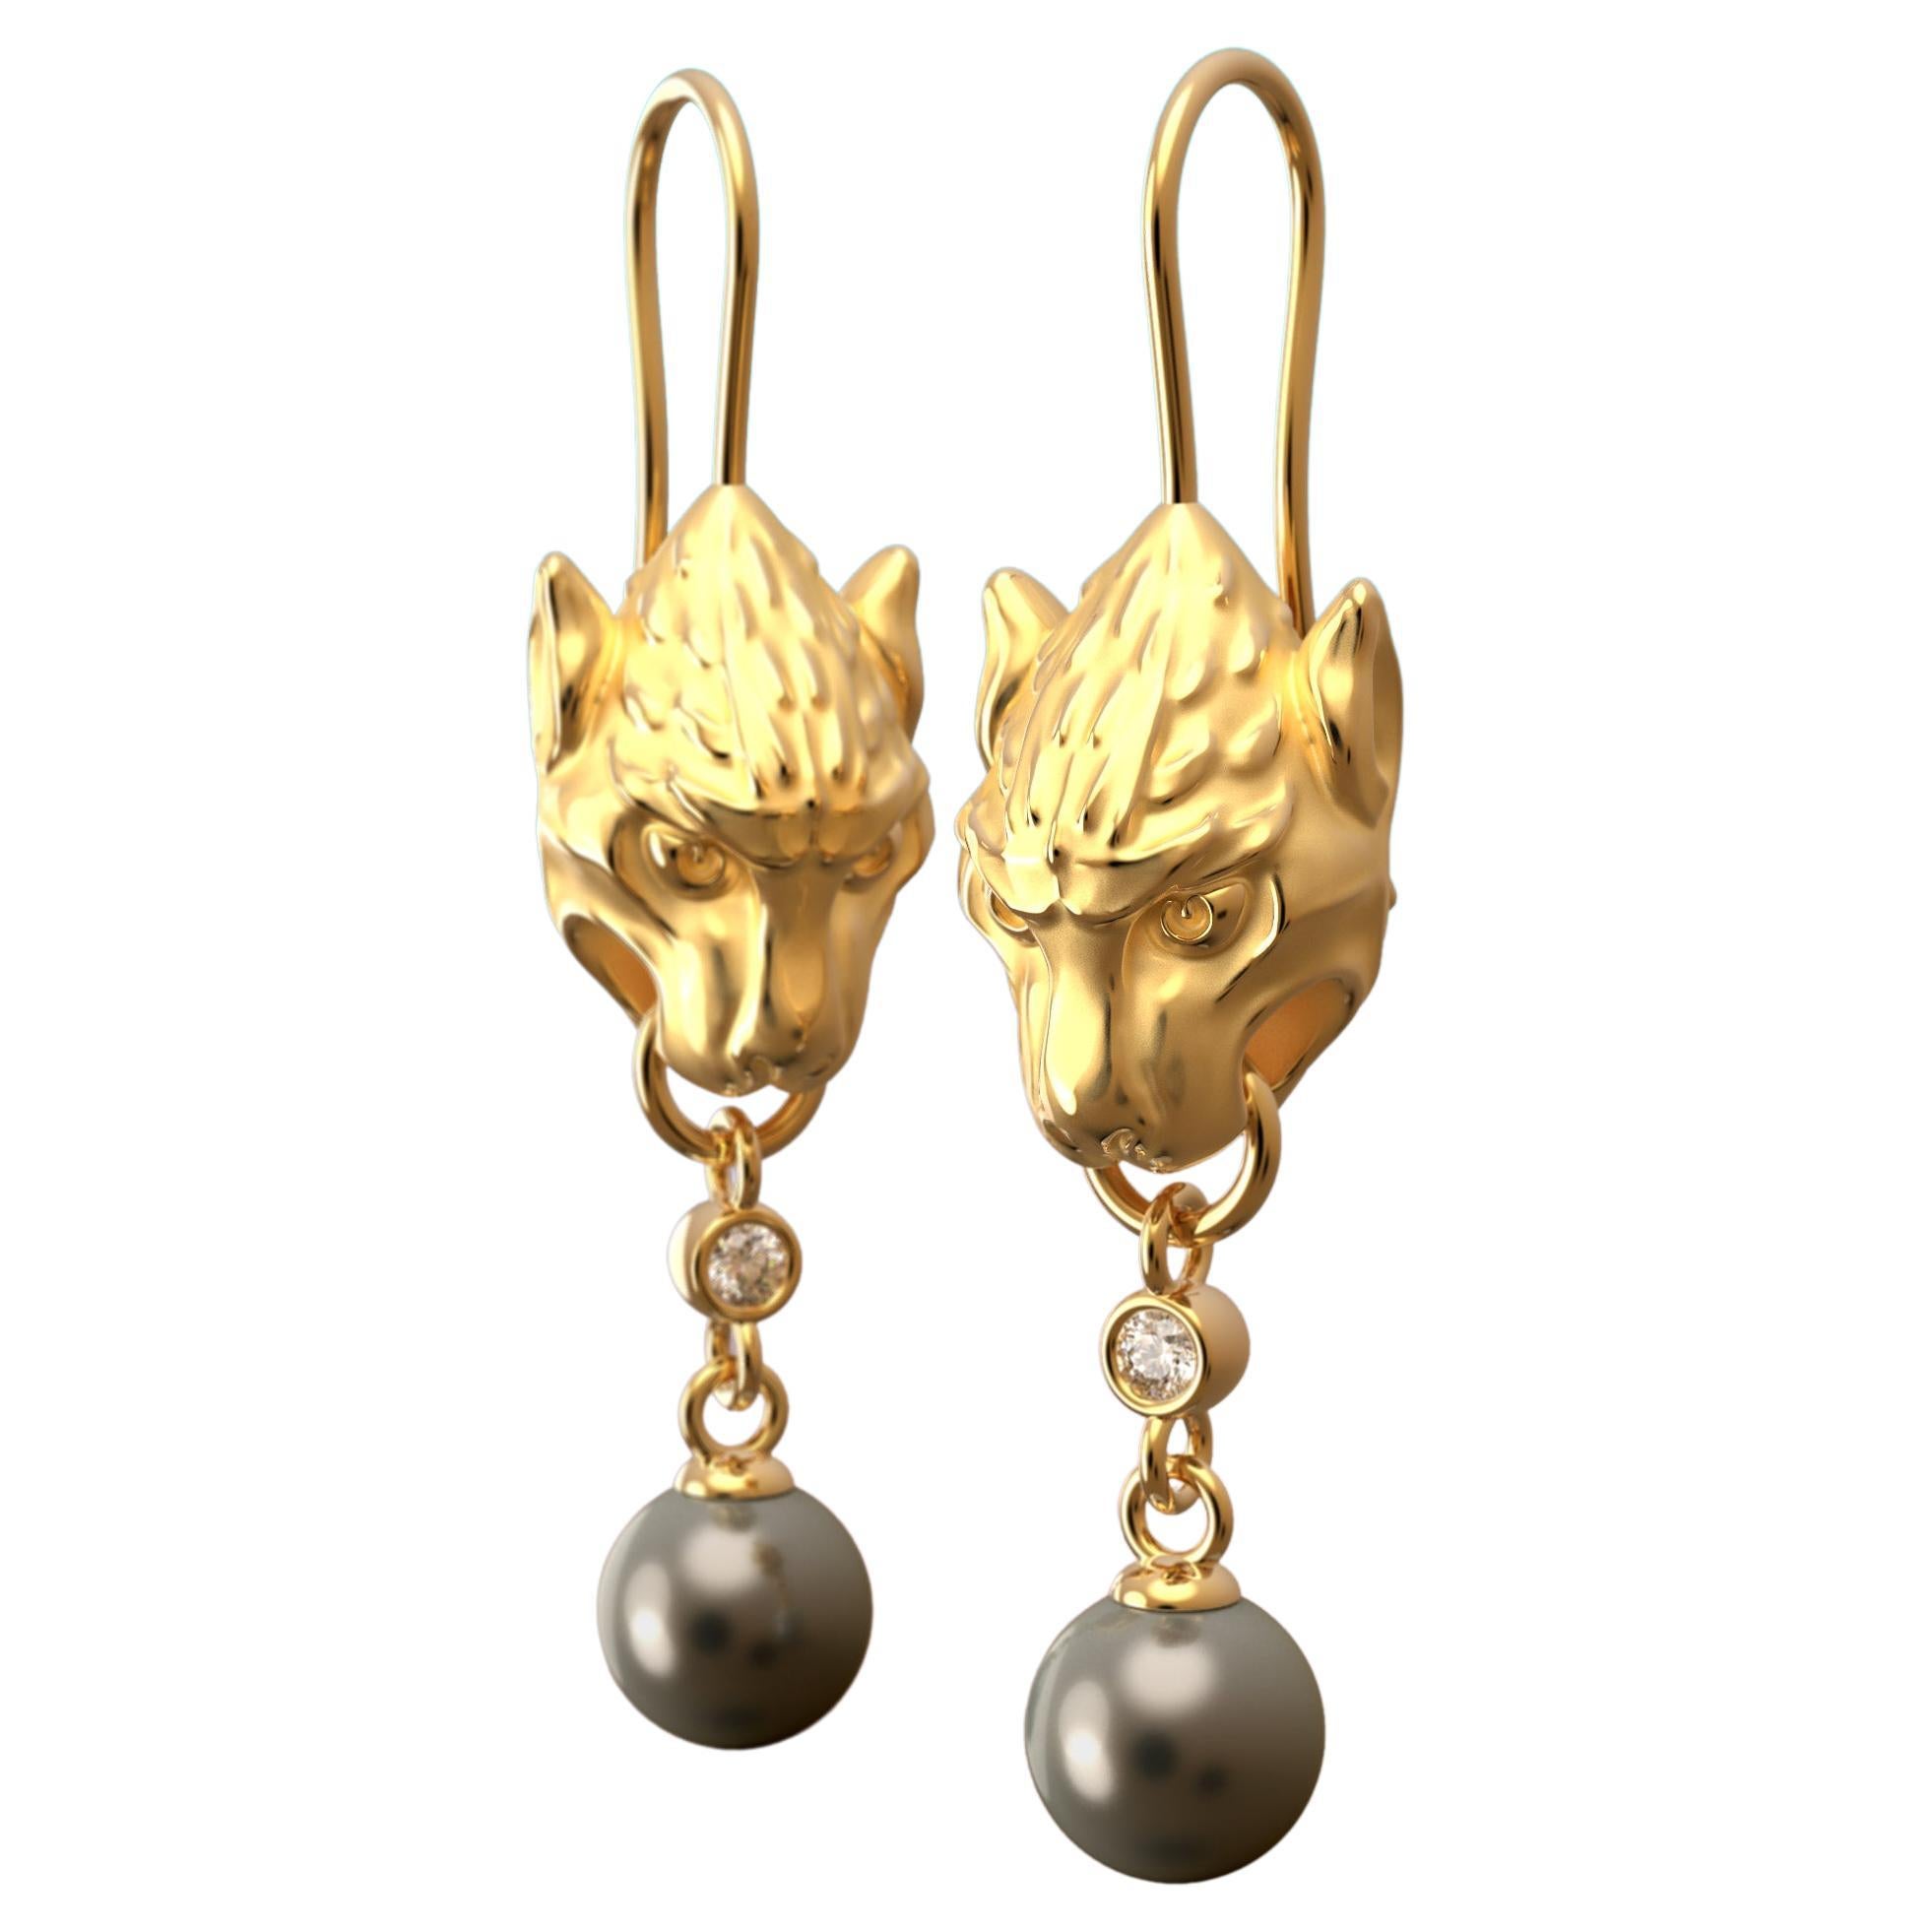  Pearls and Diamonds 14k Gold Earrings, Gothic Gargoyle Earrings Made in Italy For Sale